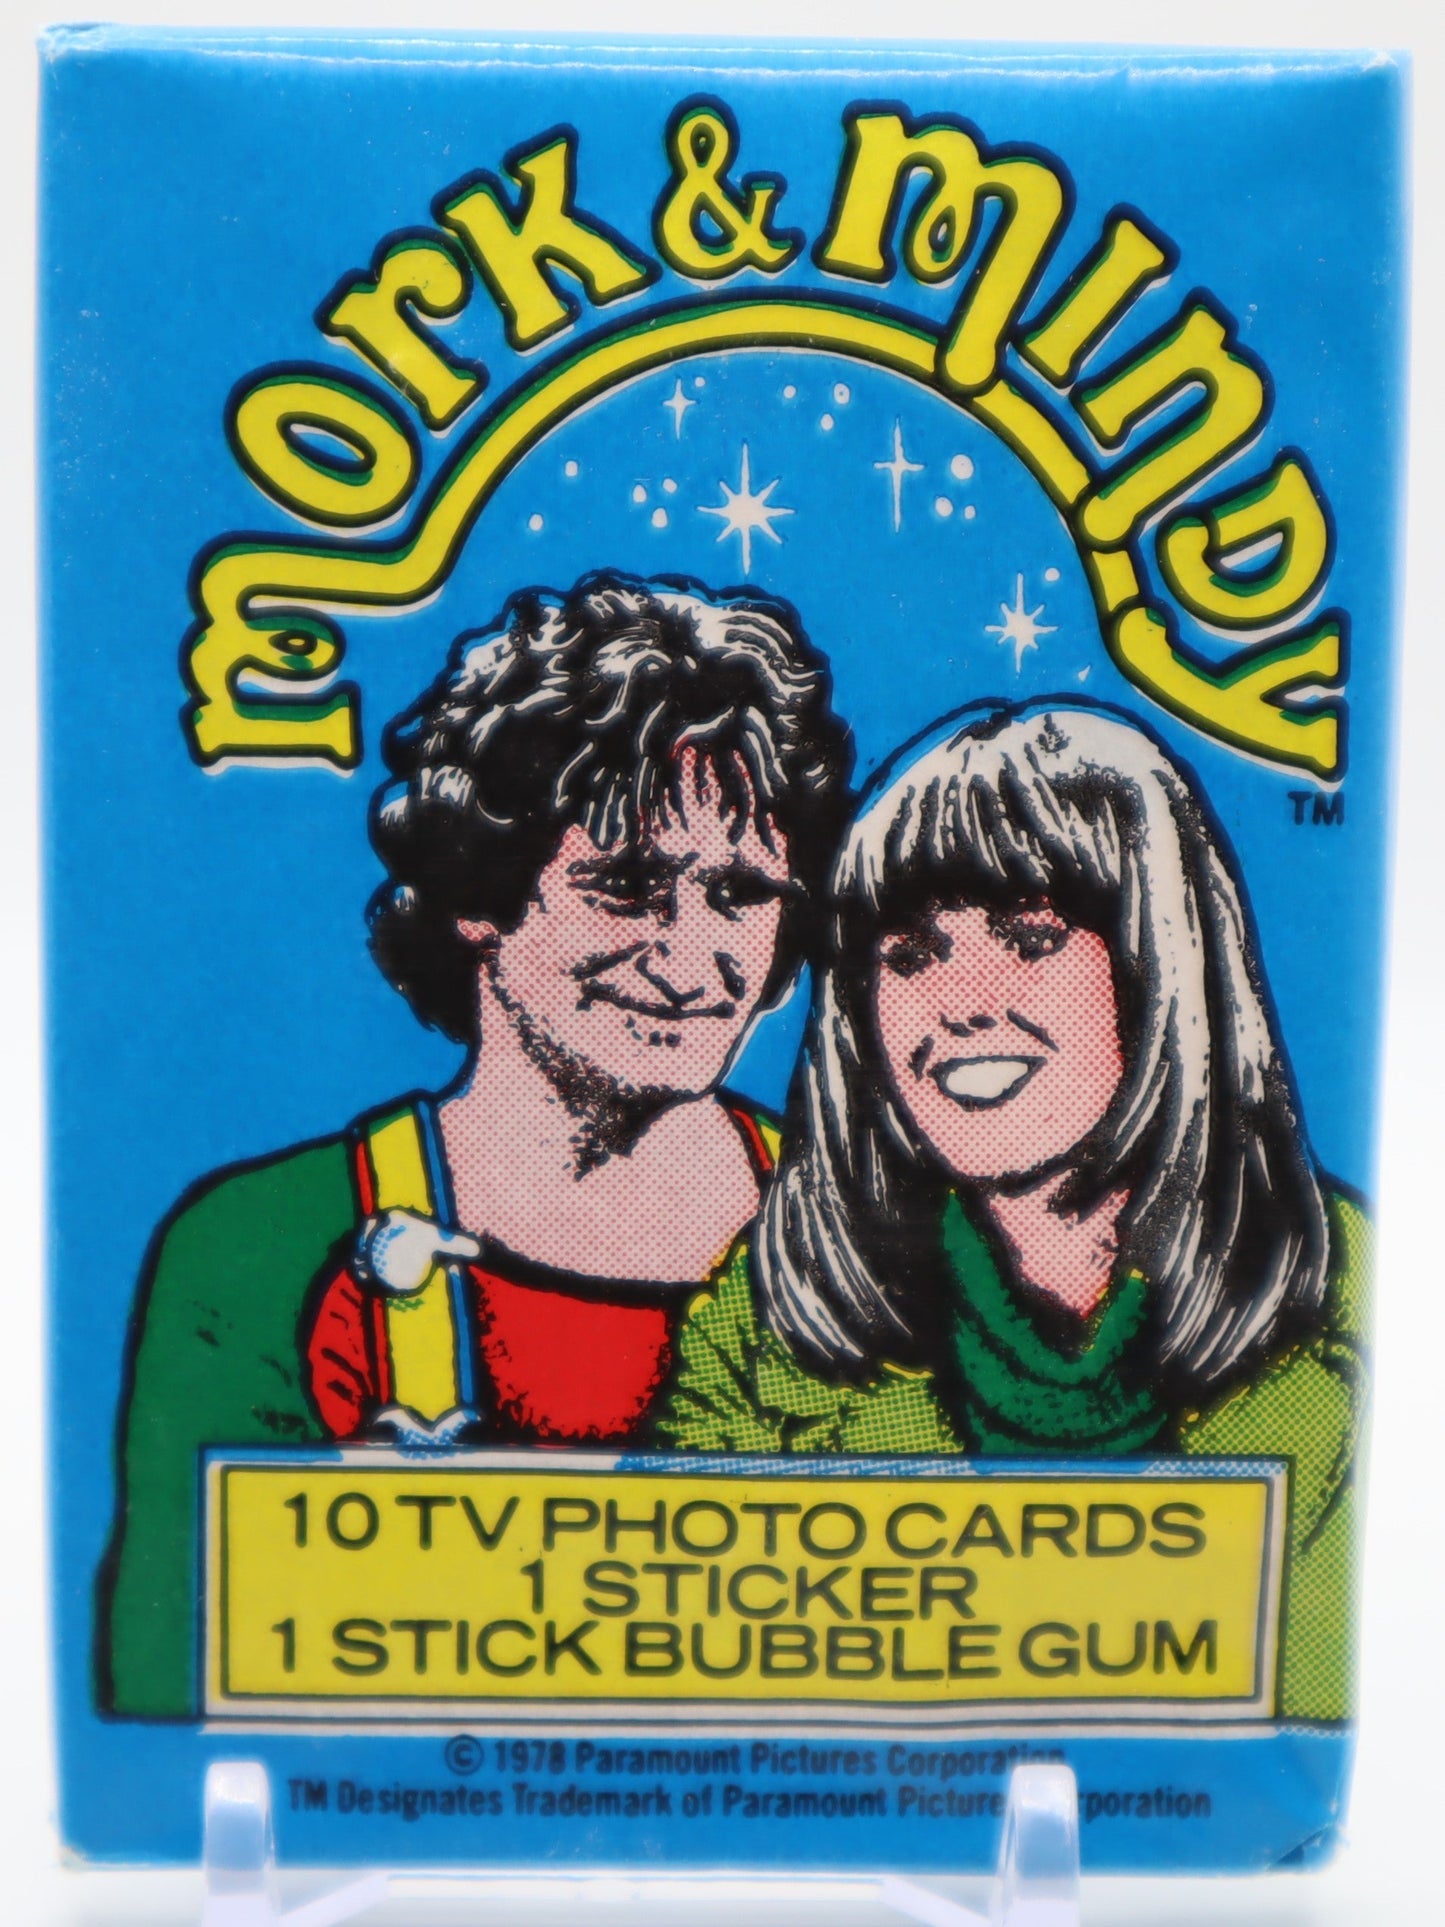 1979 Topps Mork & Minday Trading Cards Wax Pack - Collectibles